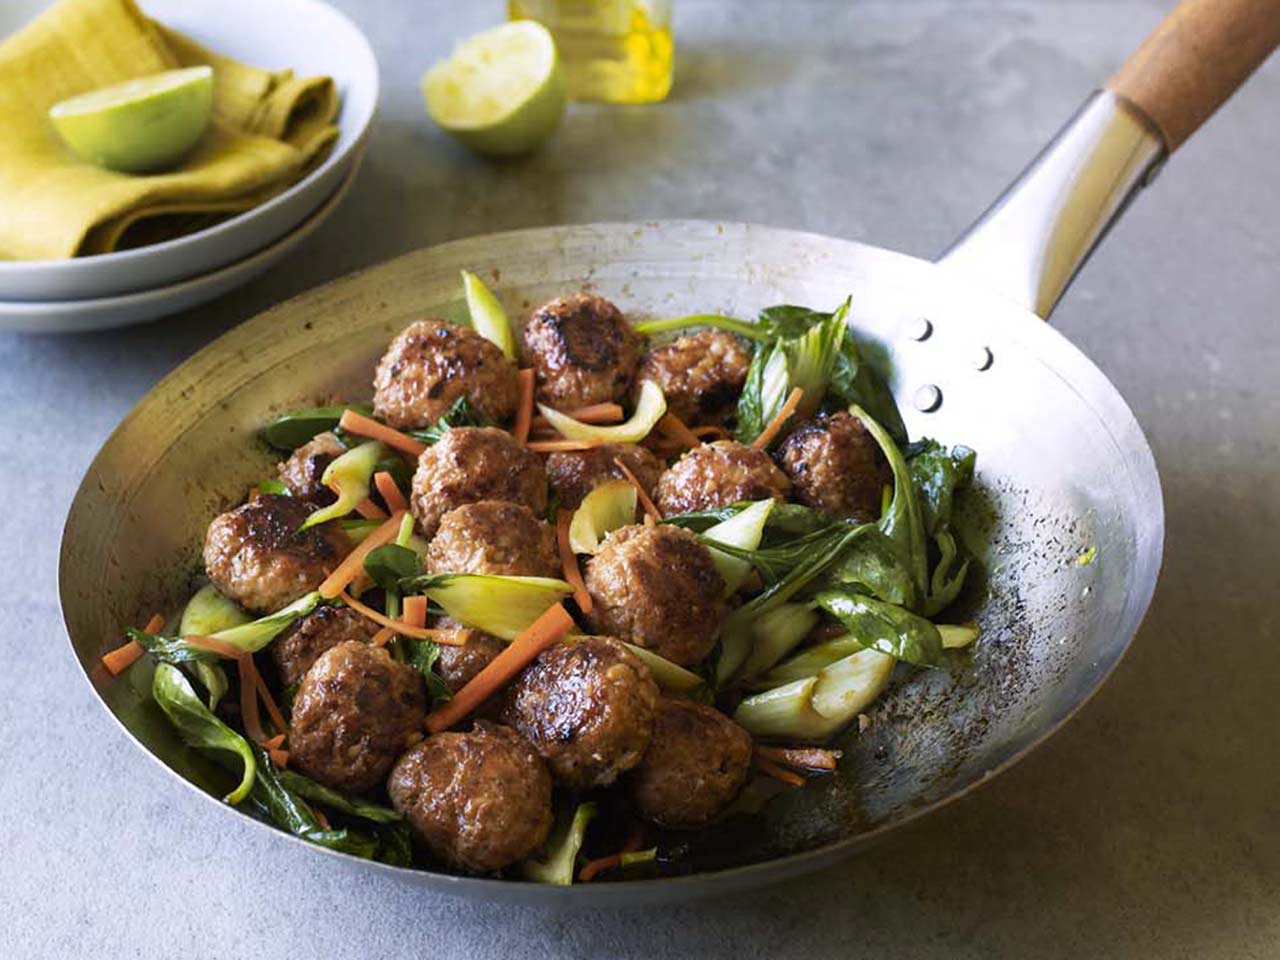 Phil Vickery's easy sweet and sour meatballs with ginger and lime